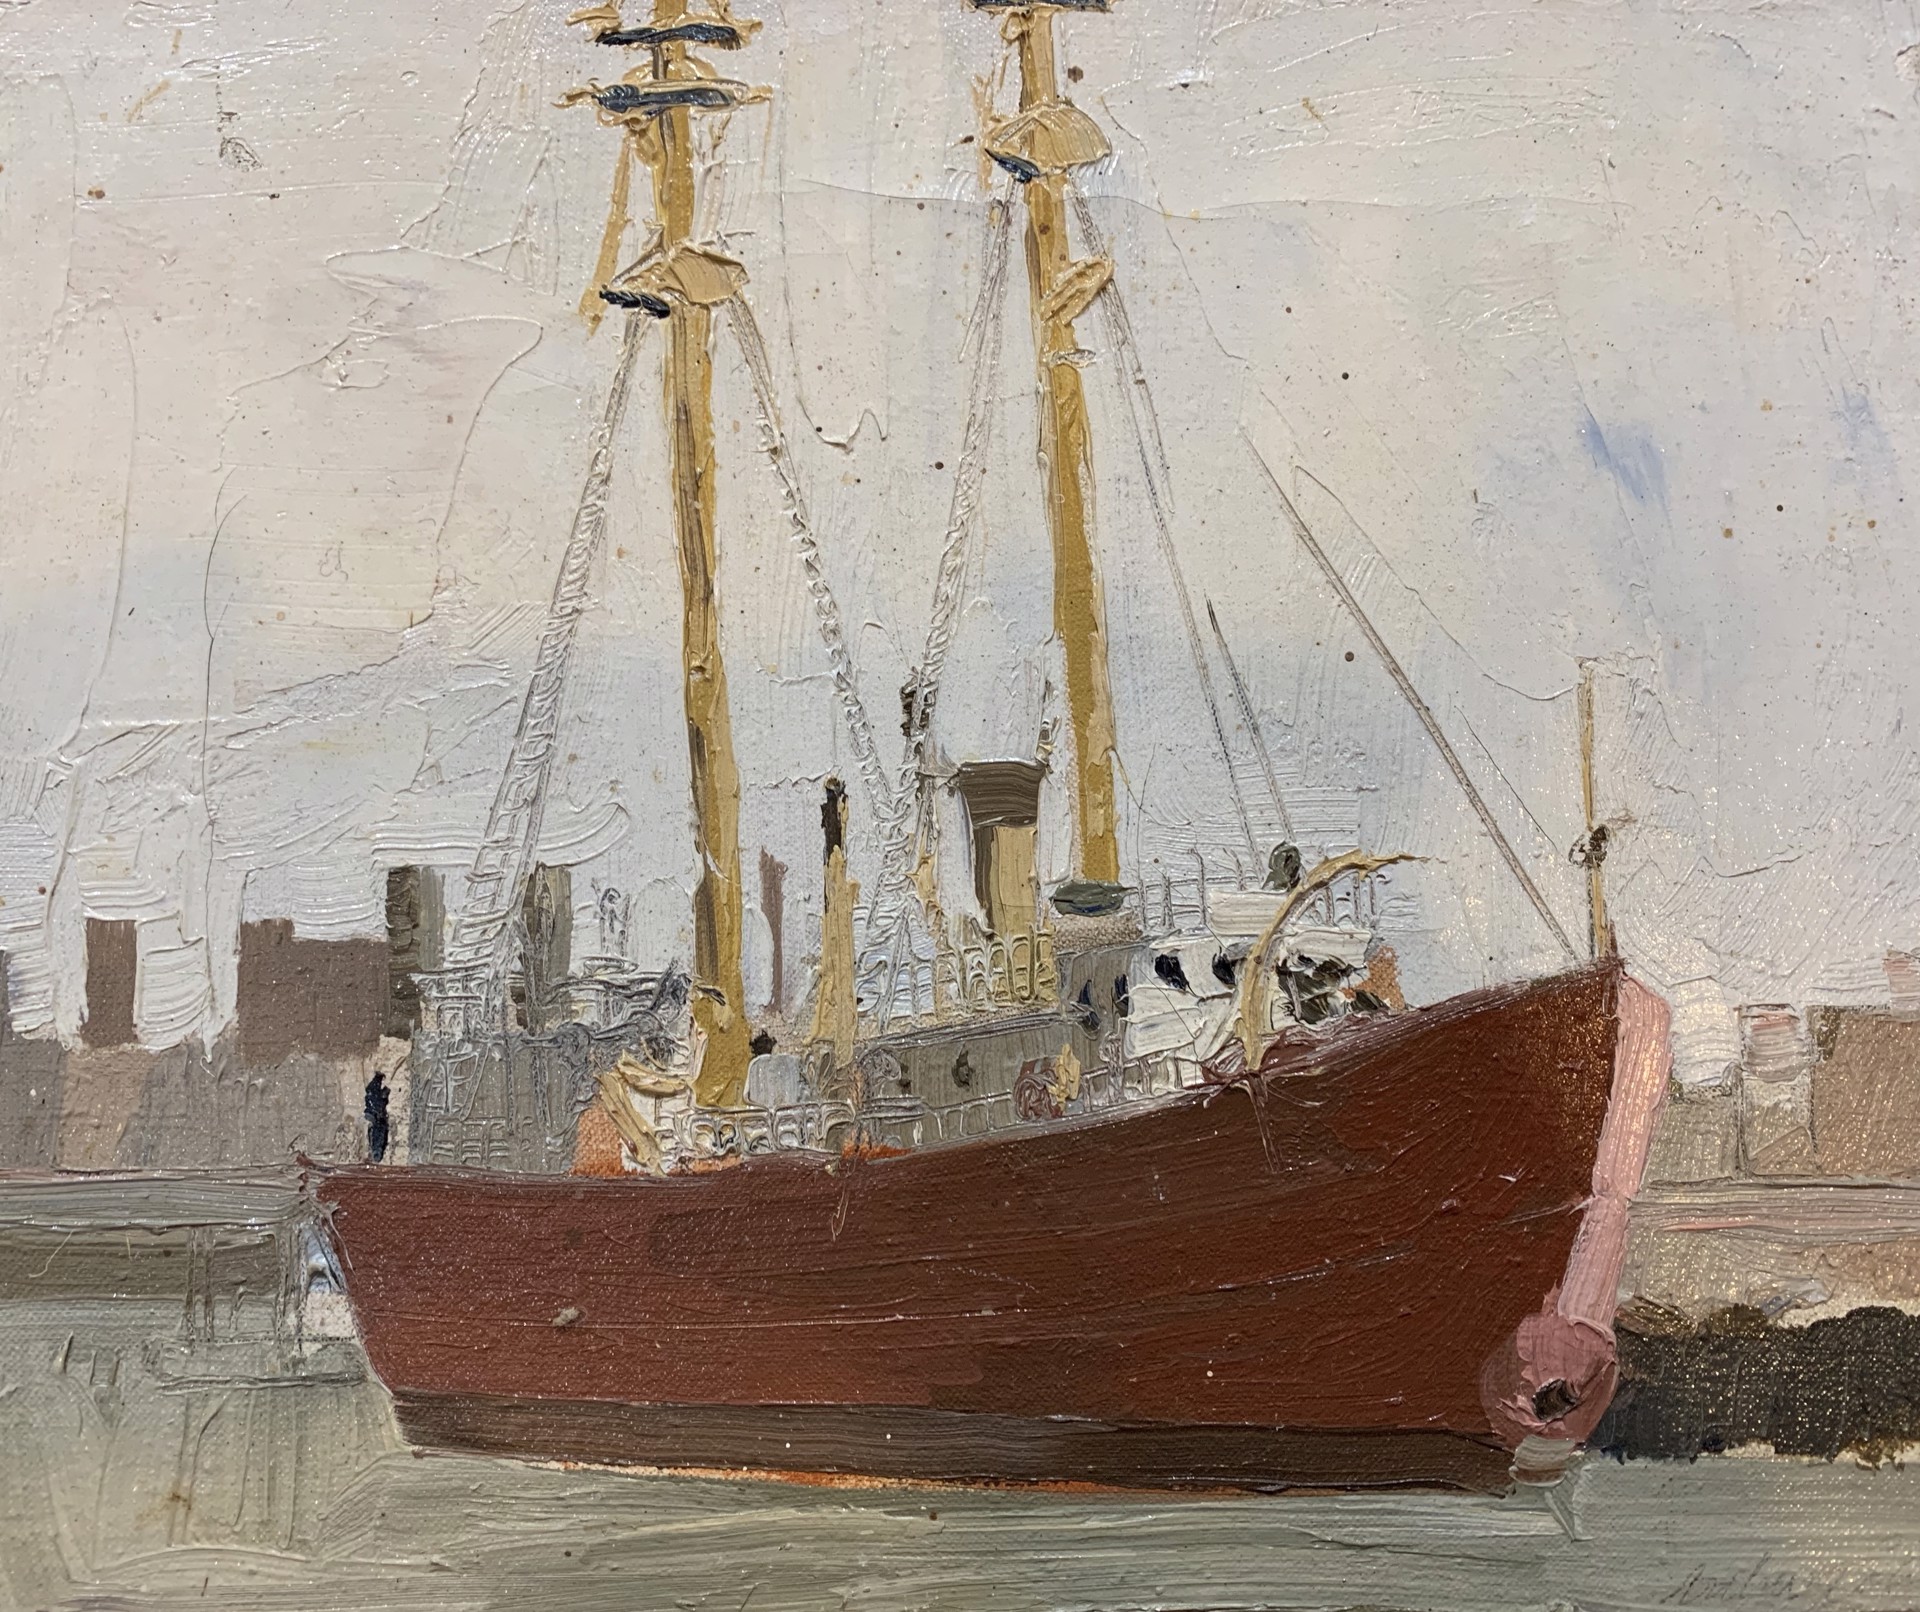 Ambrose Lightship at NY's South Street Seaport by Arthur Cohen